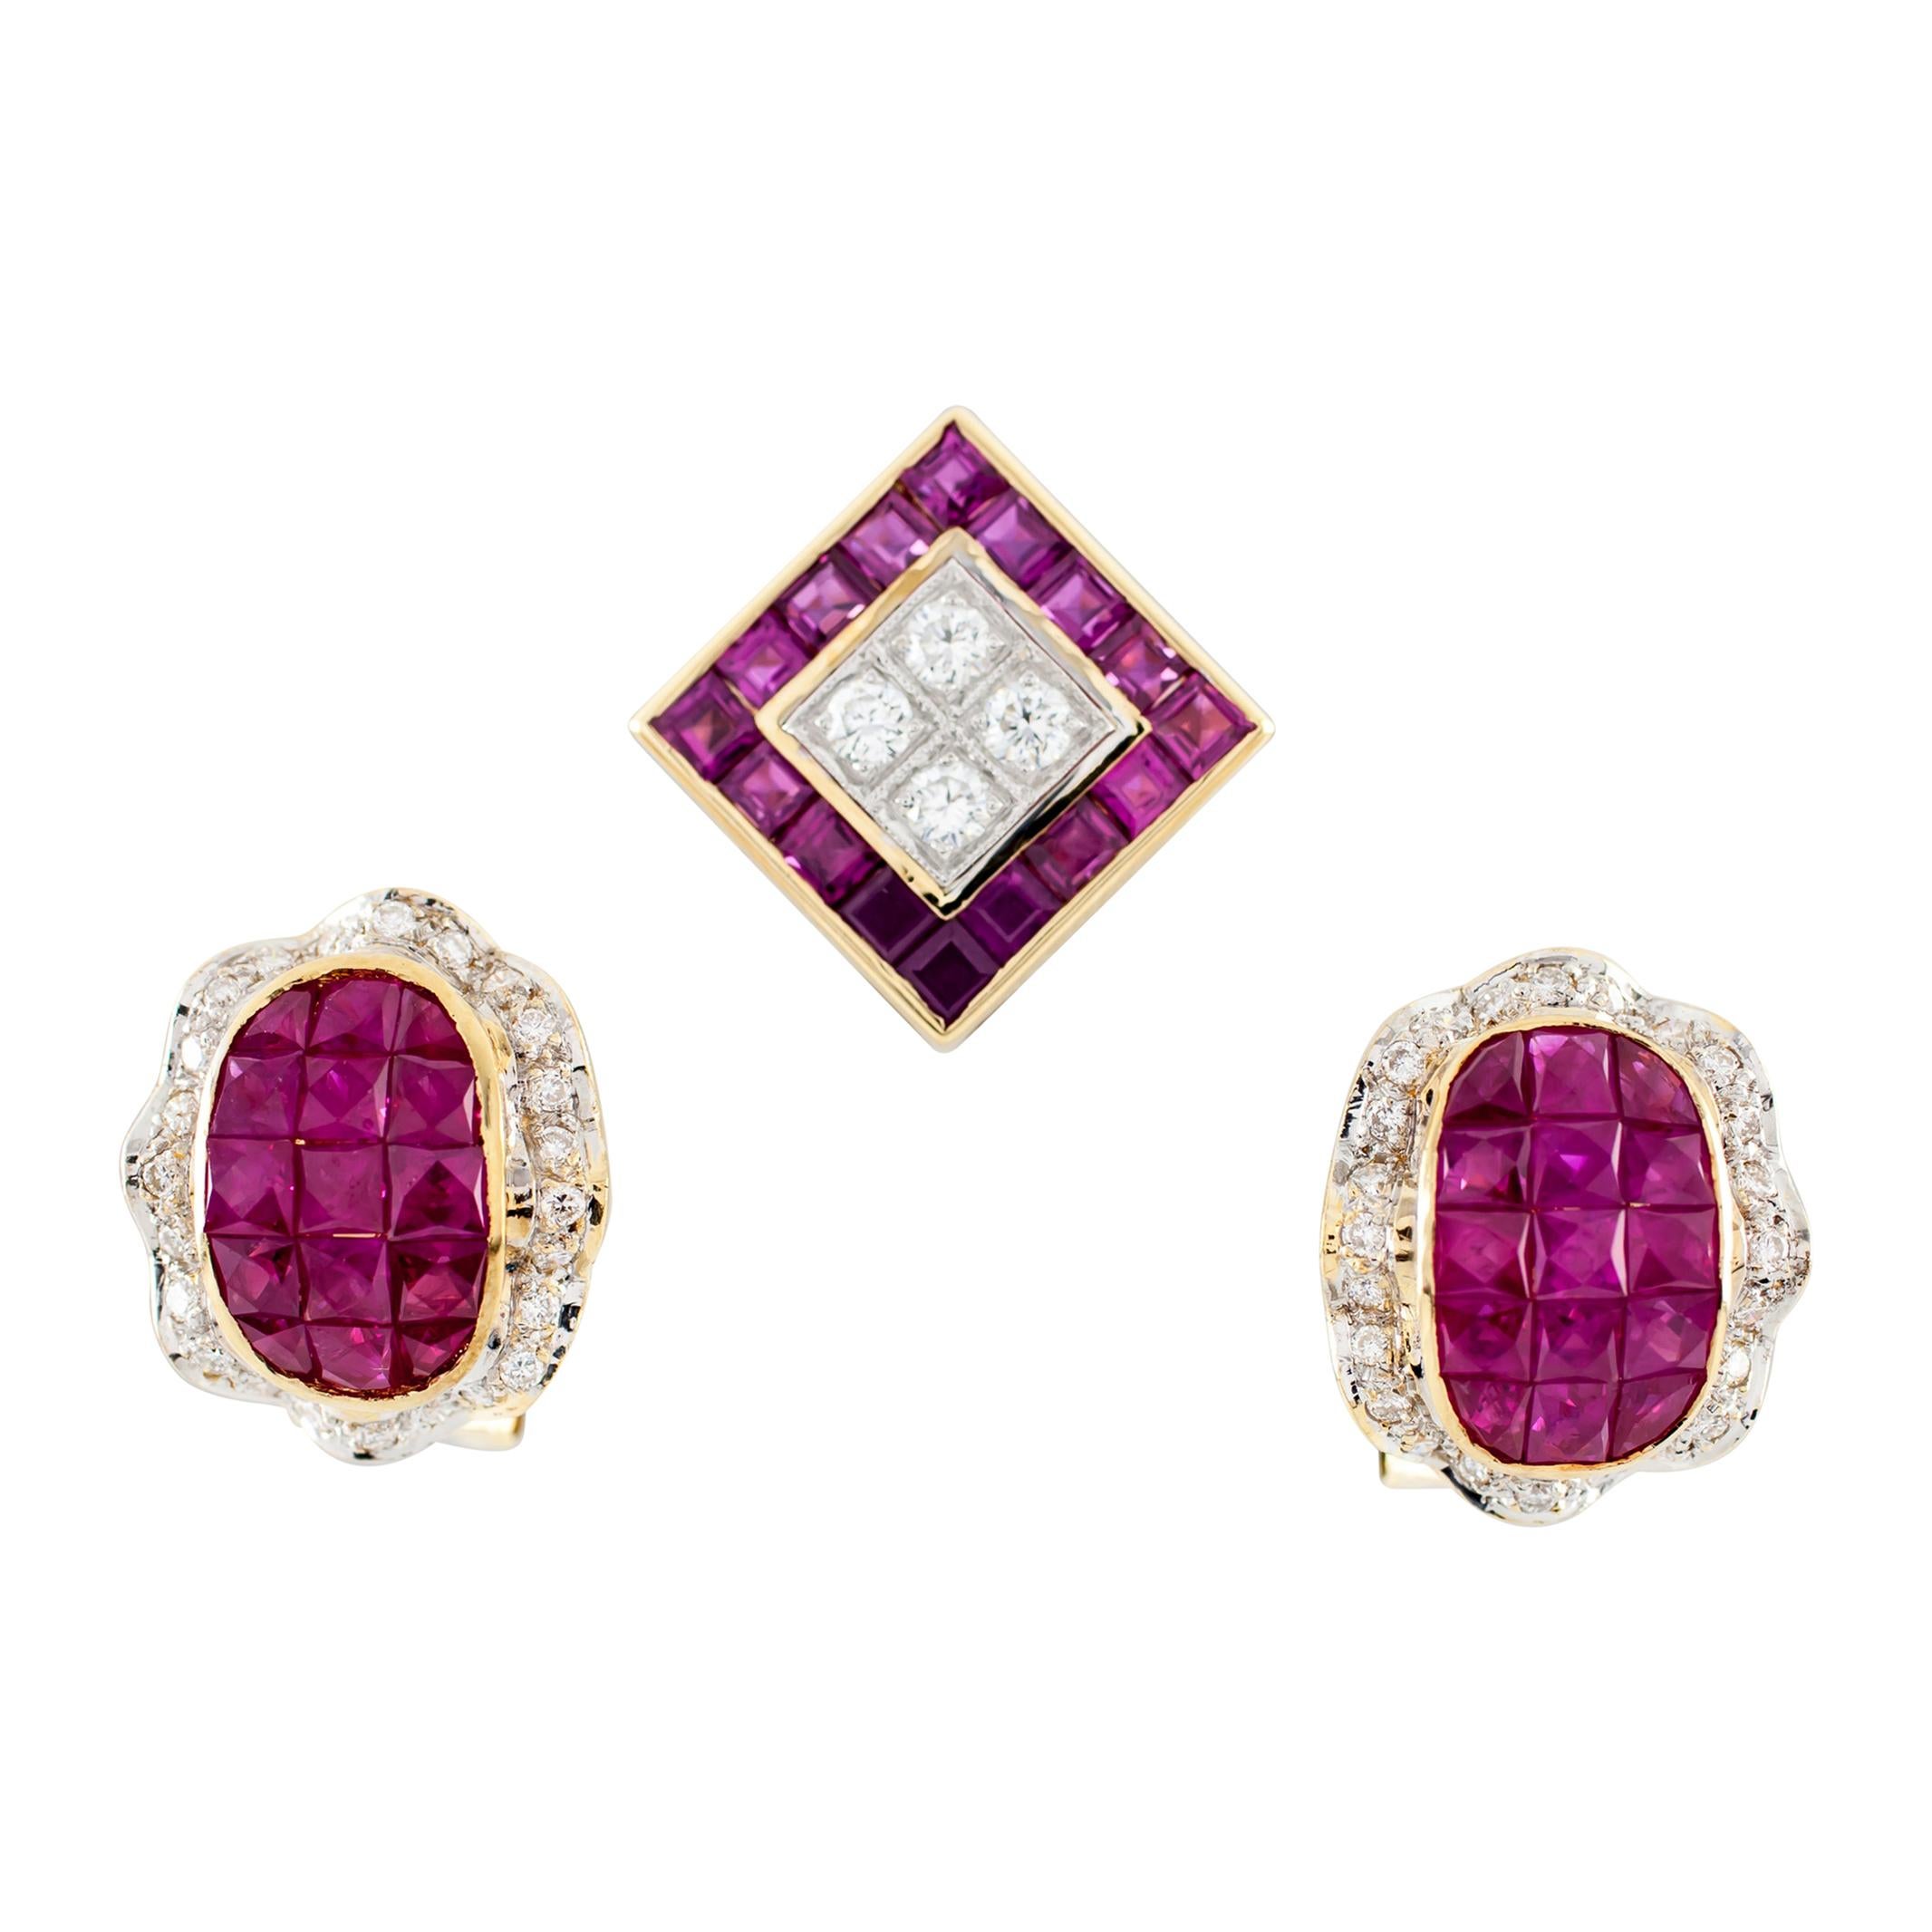 5.75 carat Ruby & 1.35 carat Diamond 18k Yellow Gold Earring and Pendant Set For Sale